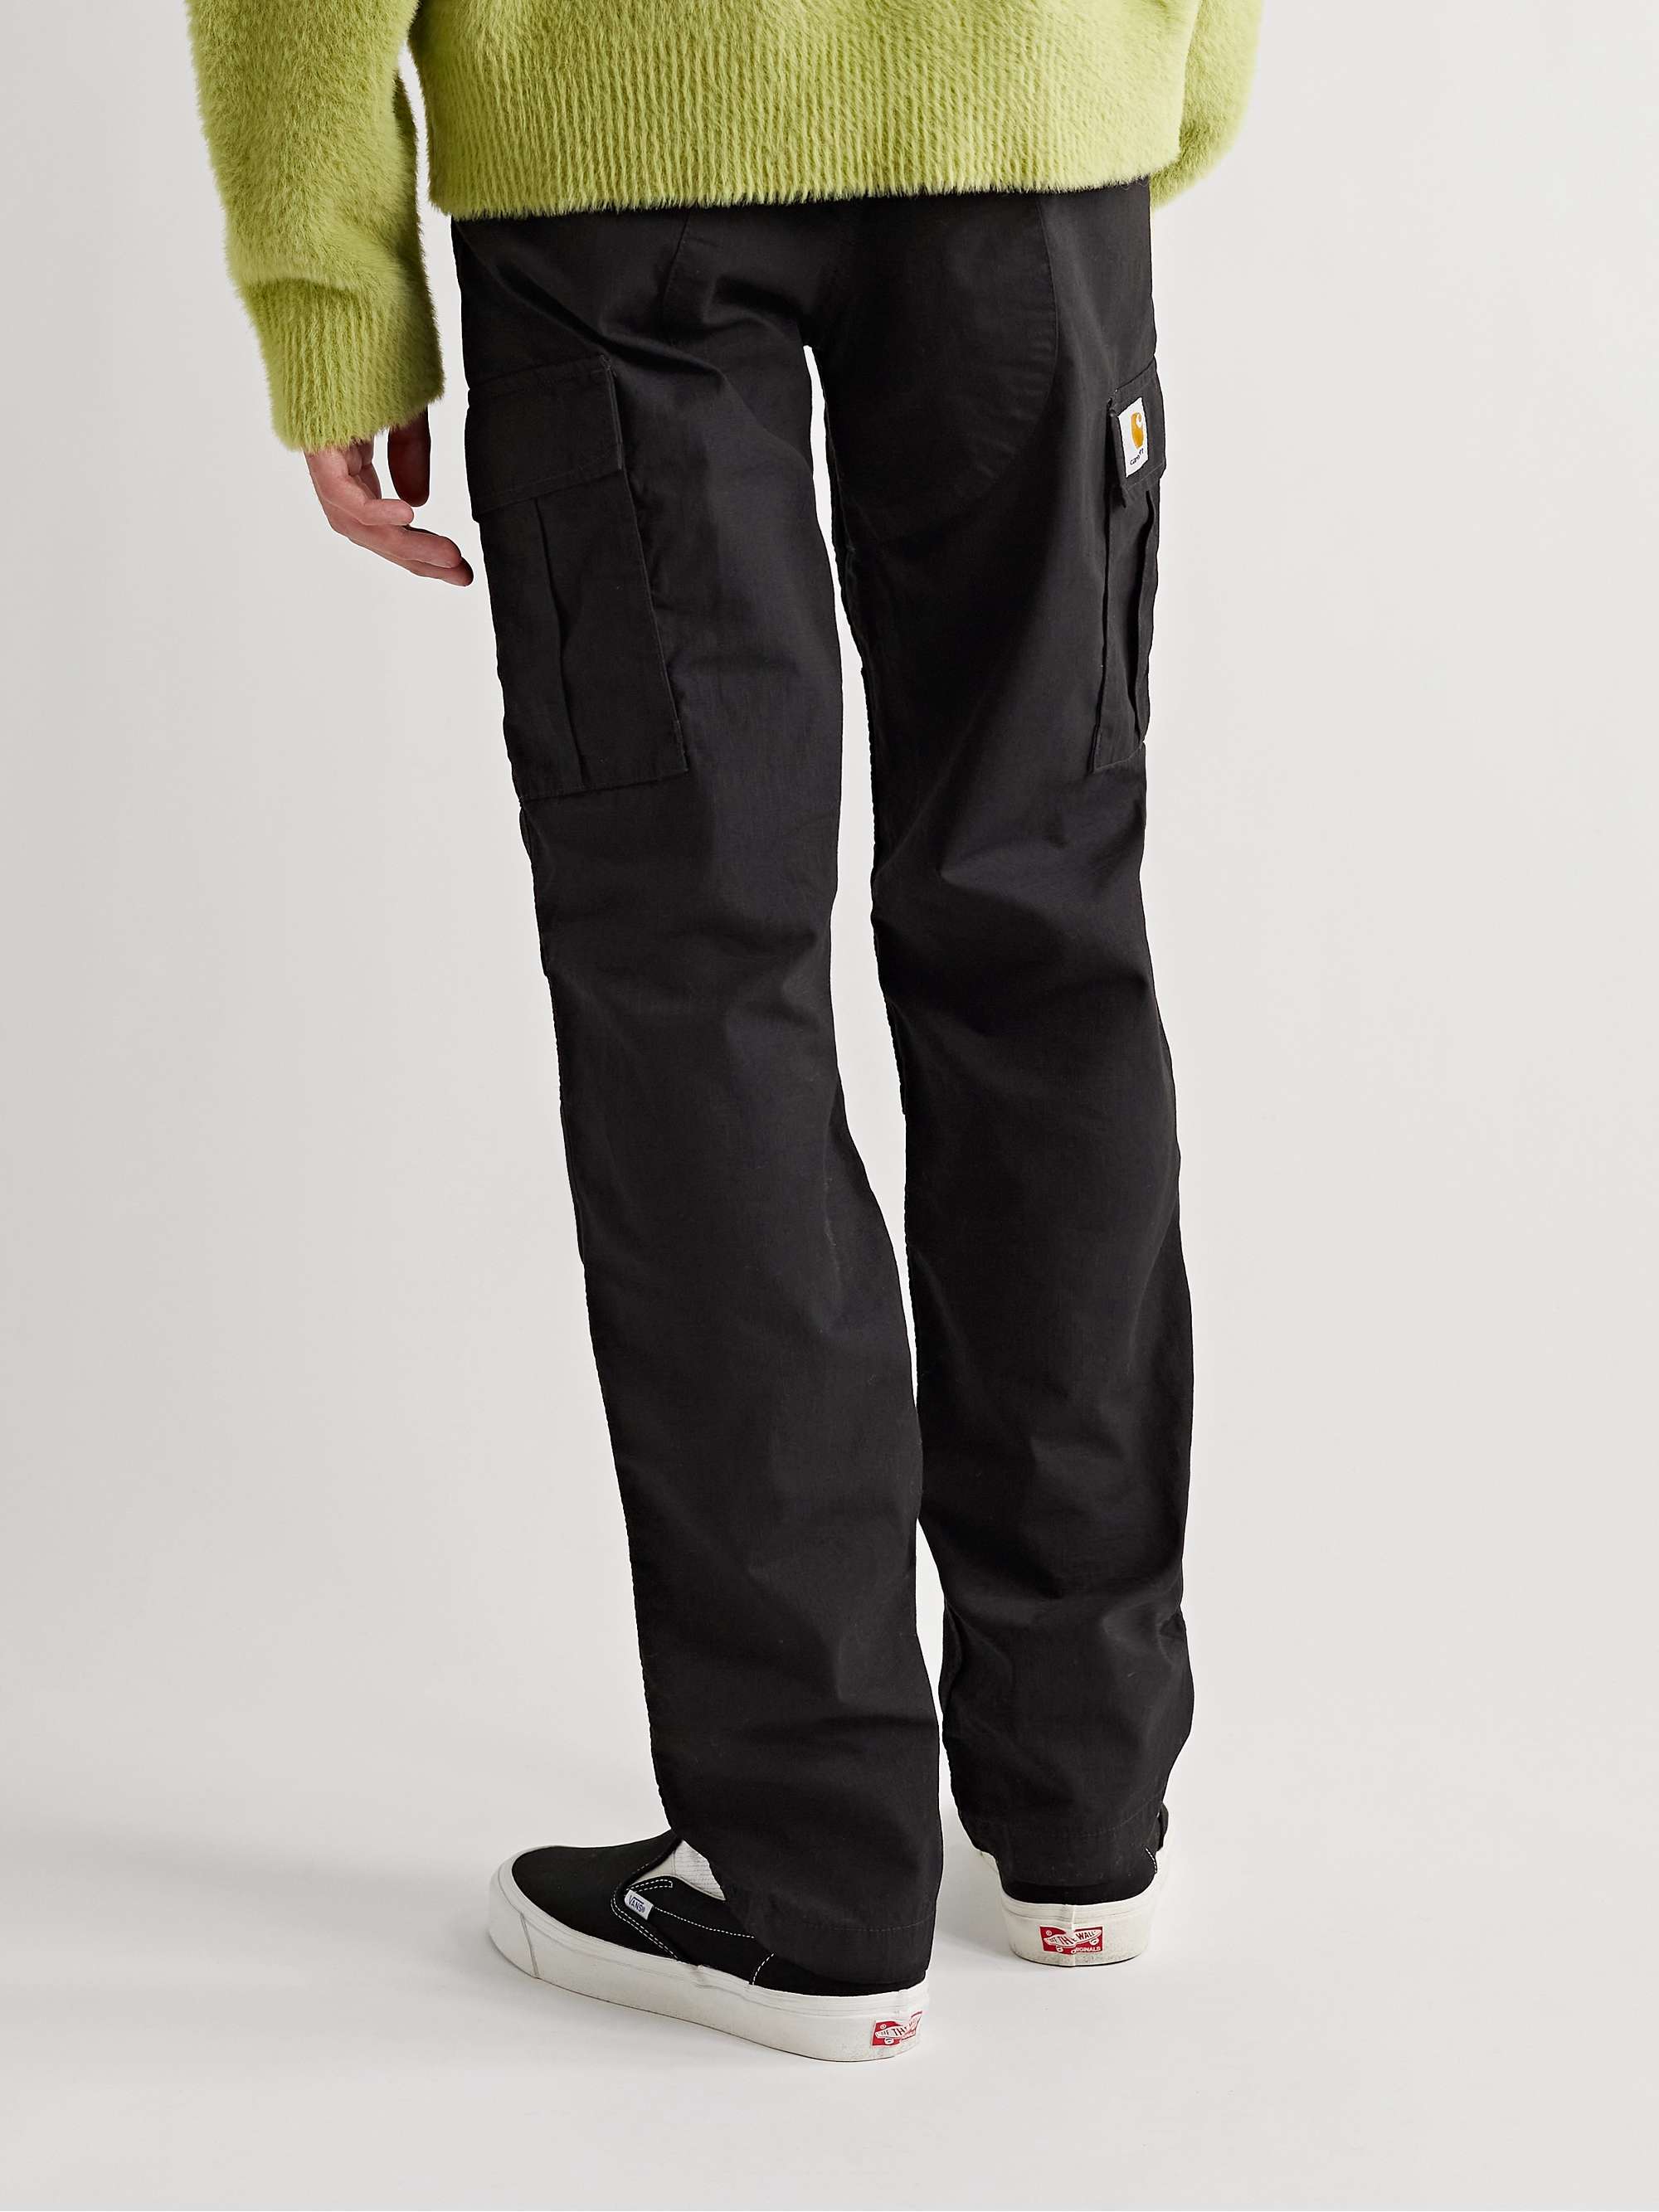 CARHARTT WIP Aviation Slim-Fit Cotton-Ripstop Cargo Trousers | MR PORTER